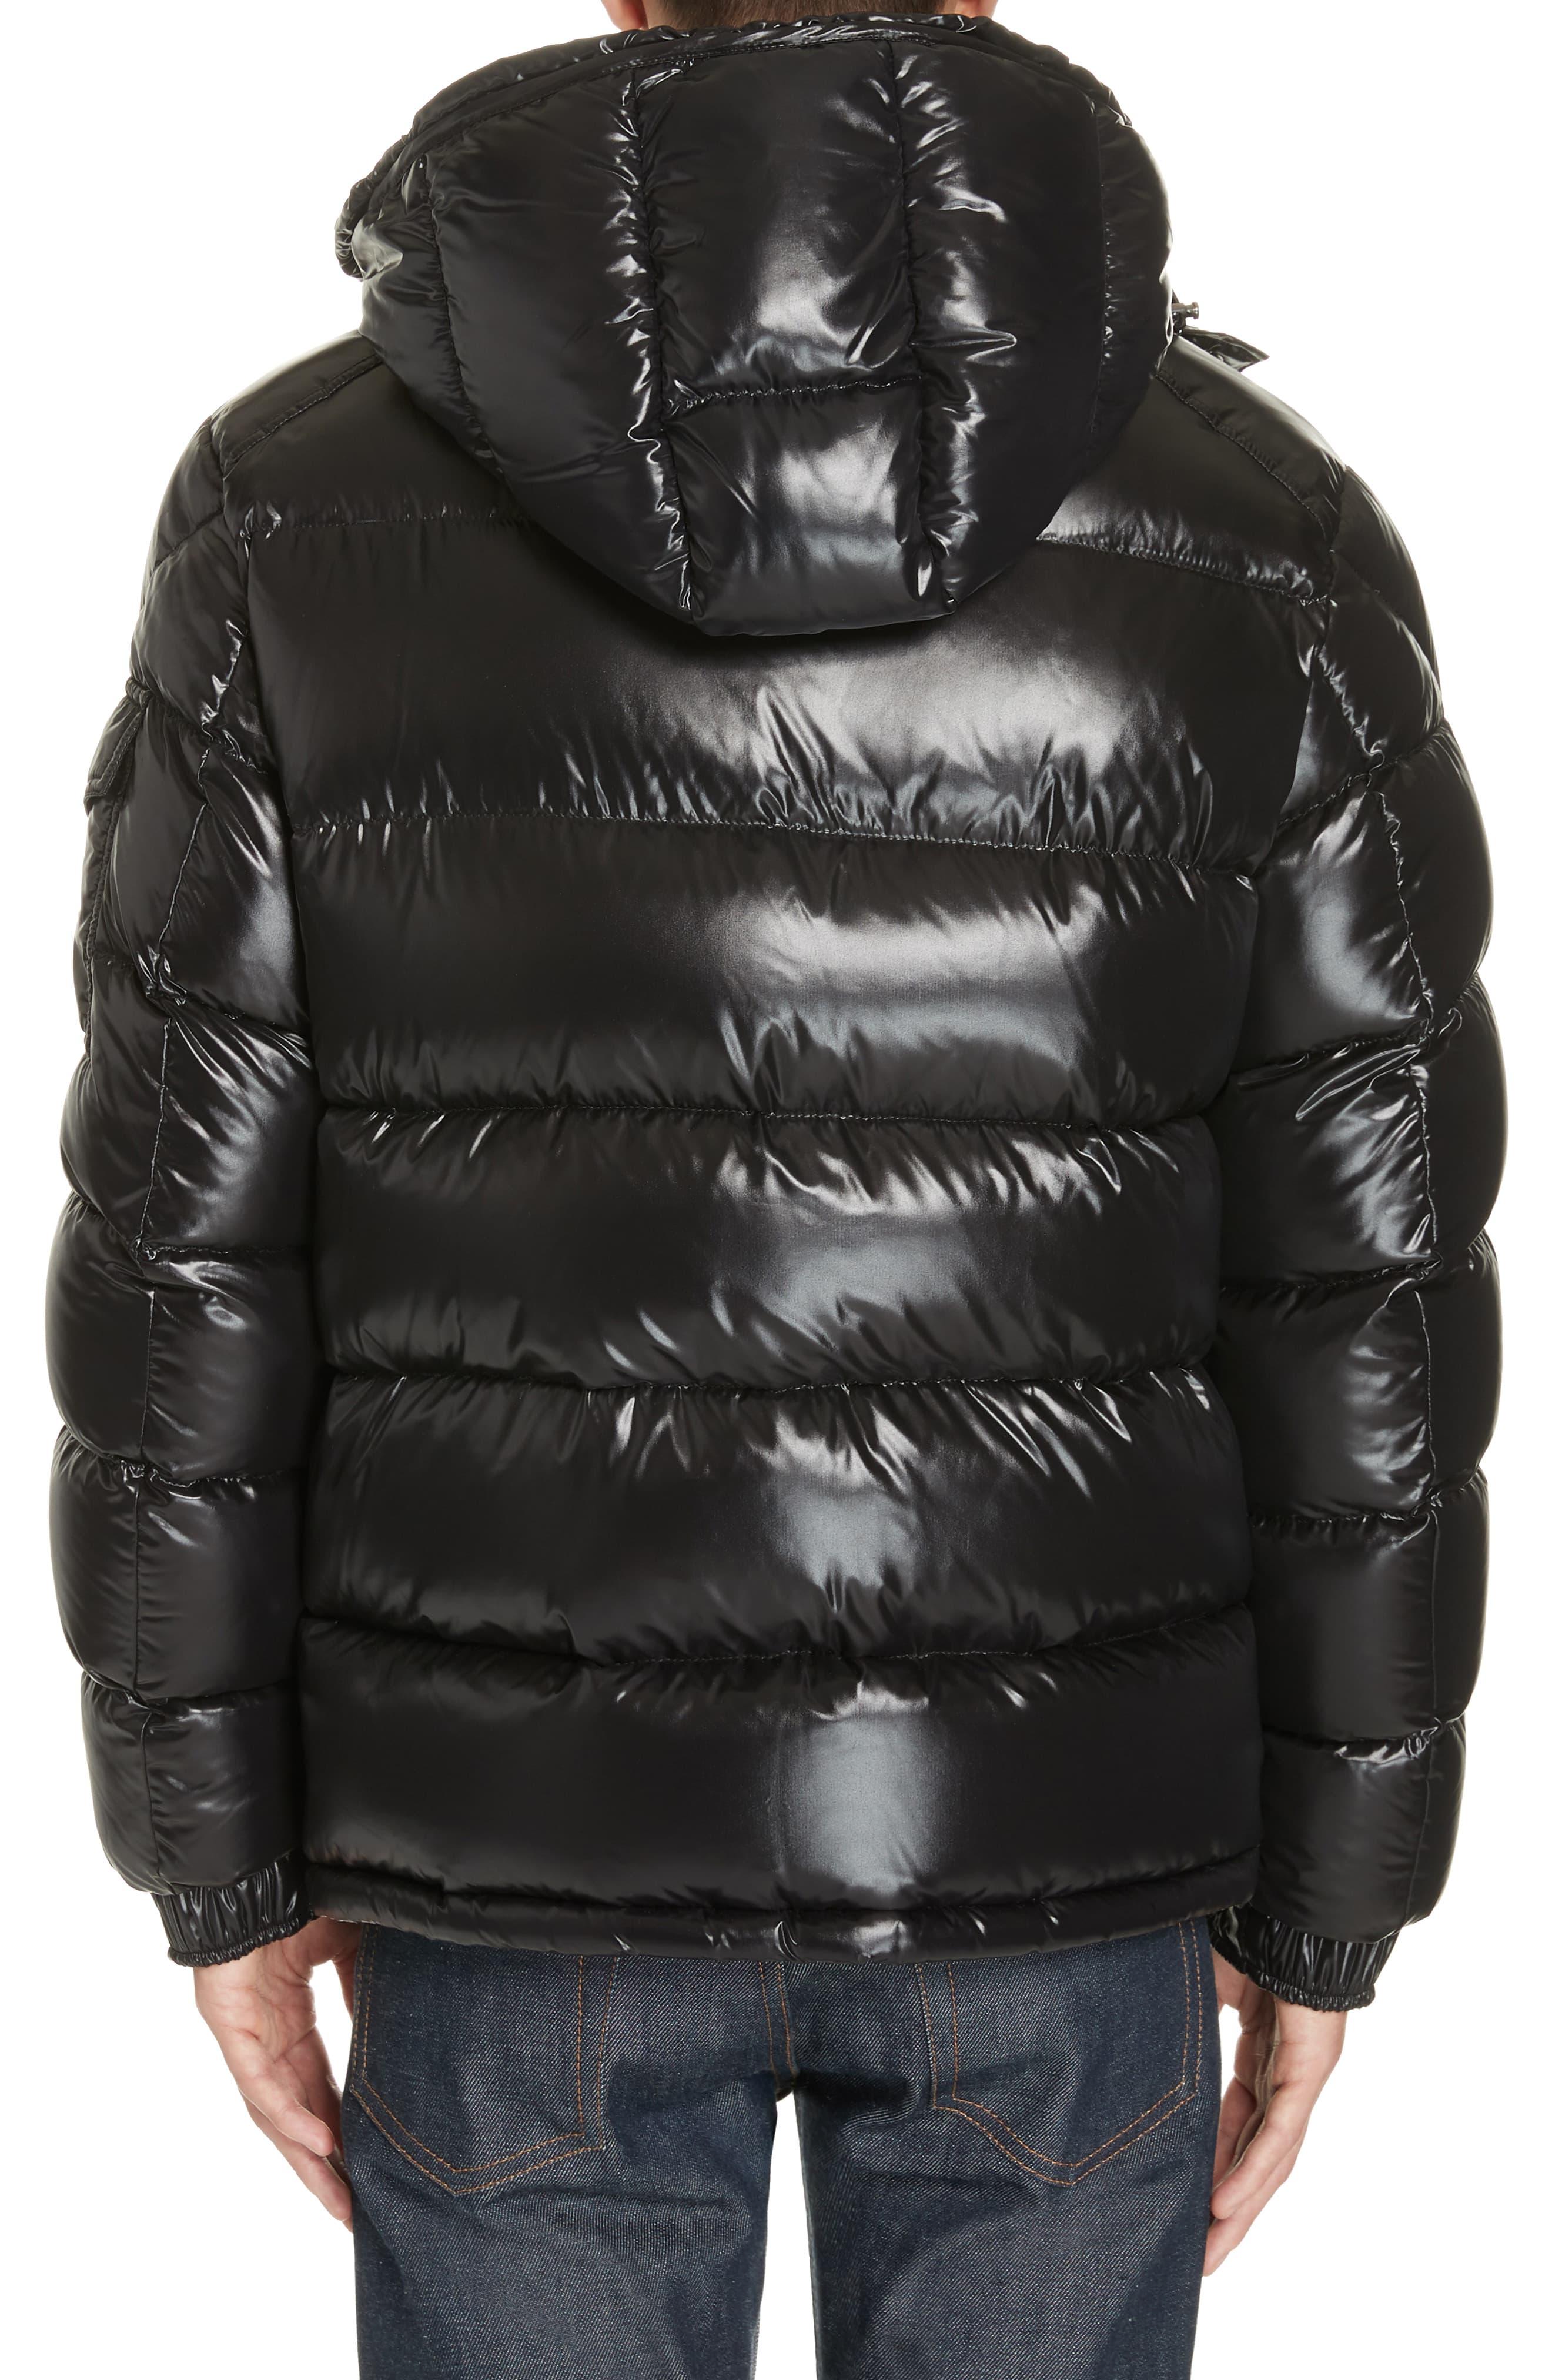 Moncler Maya Laque Quilted Down Jacket in Black for Men - Lyst